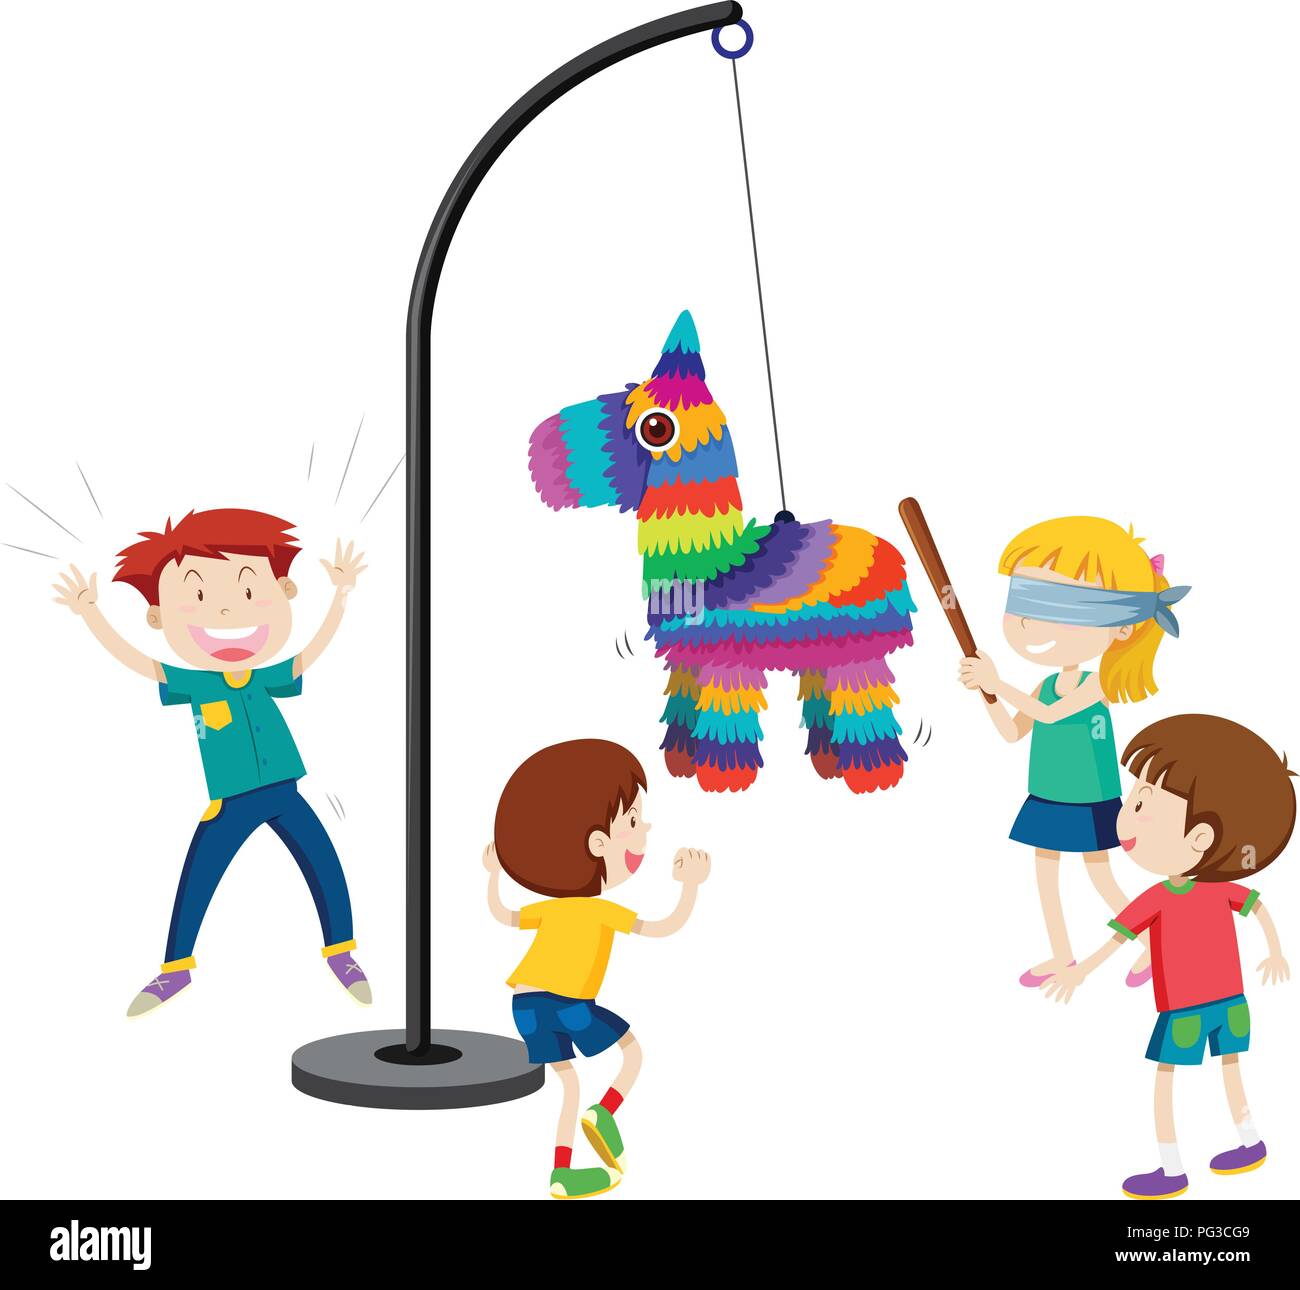 children playing pinata party game illustration Stock Vector